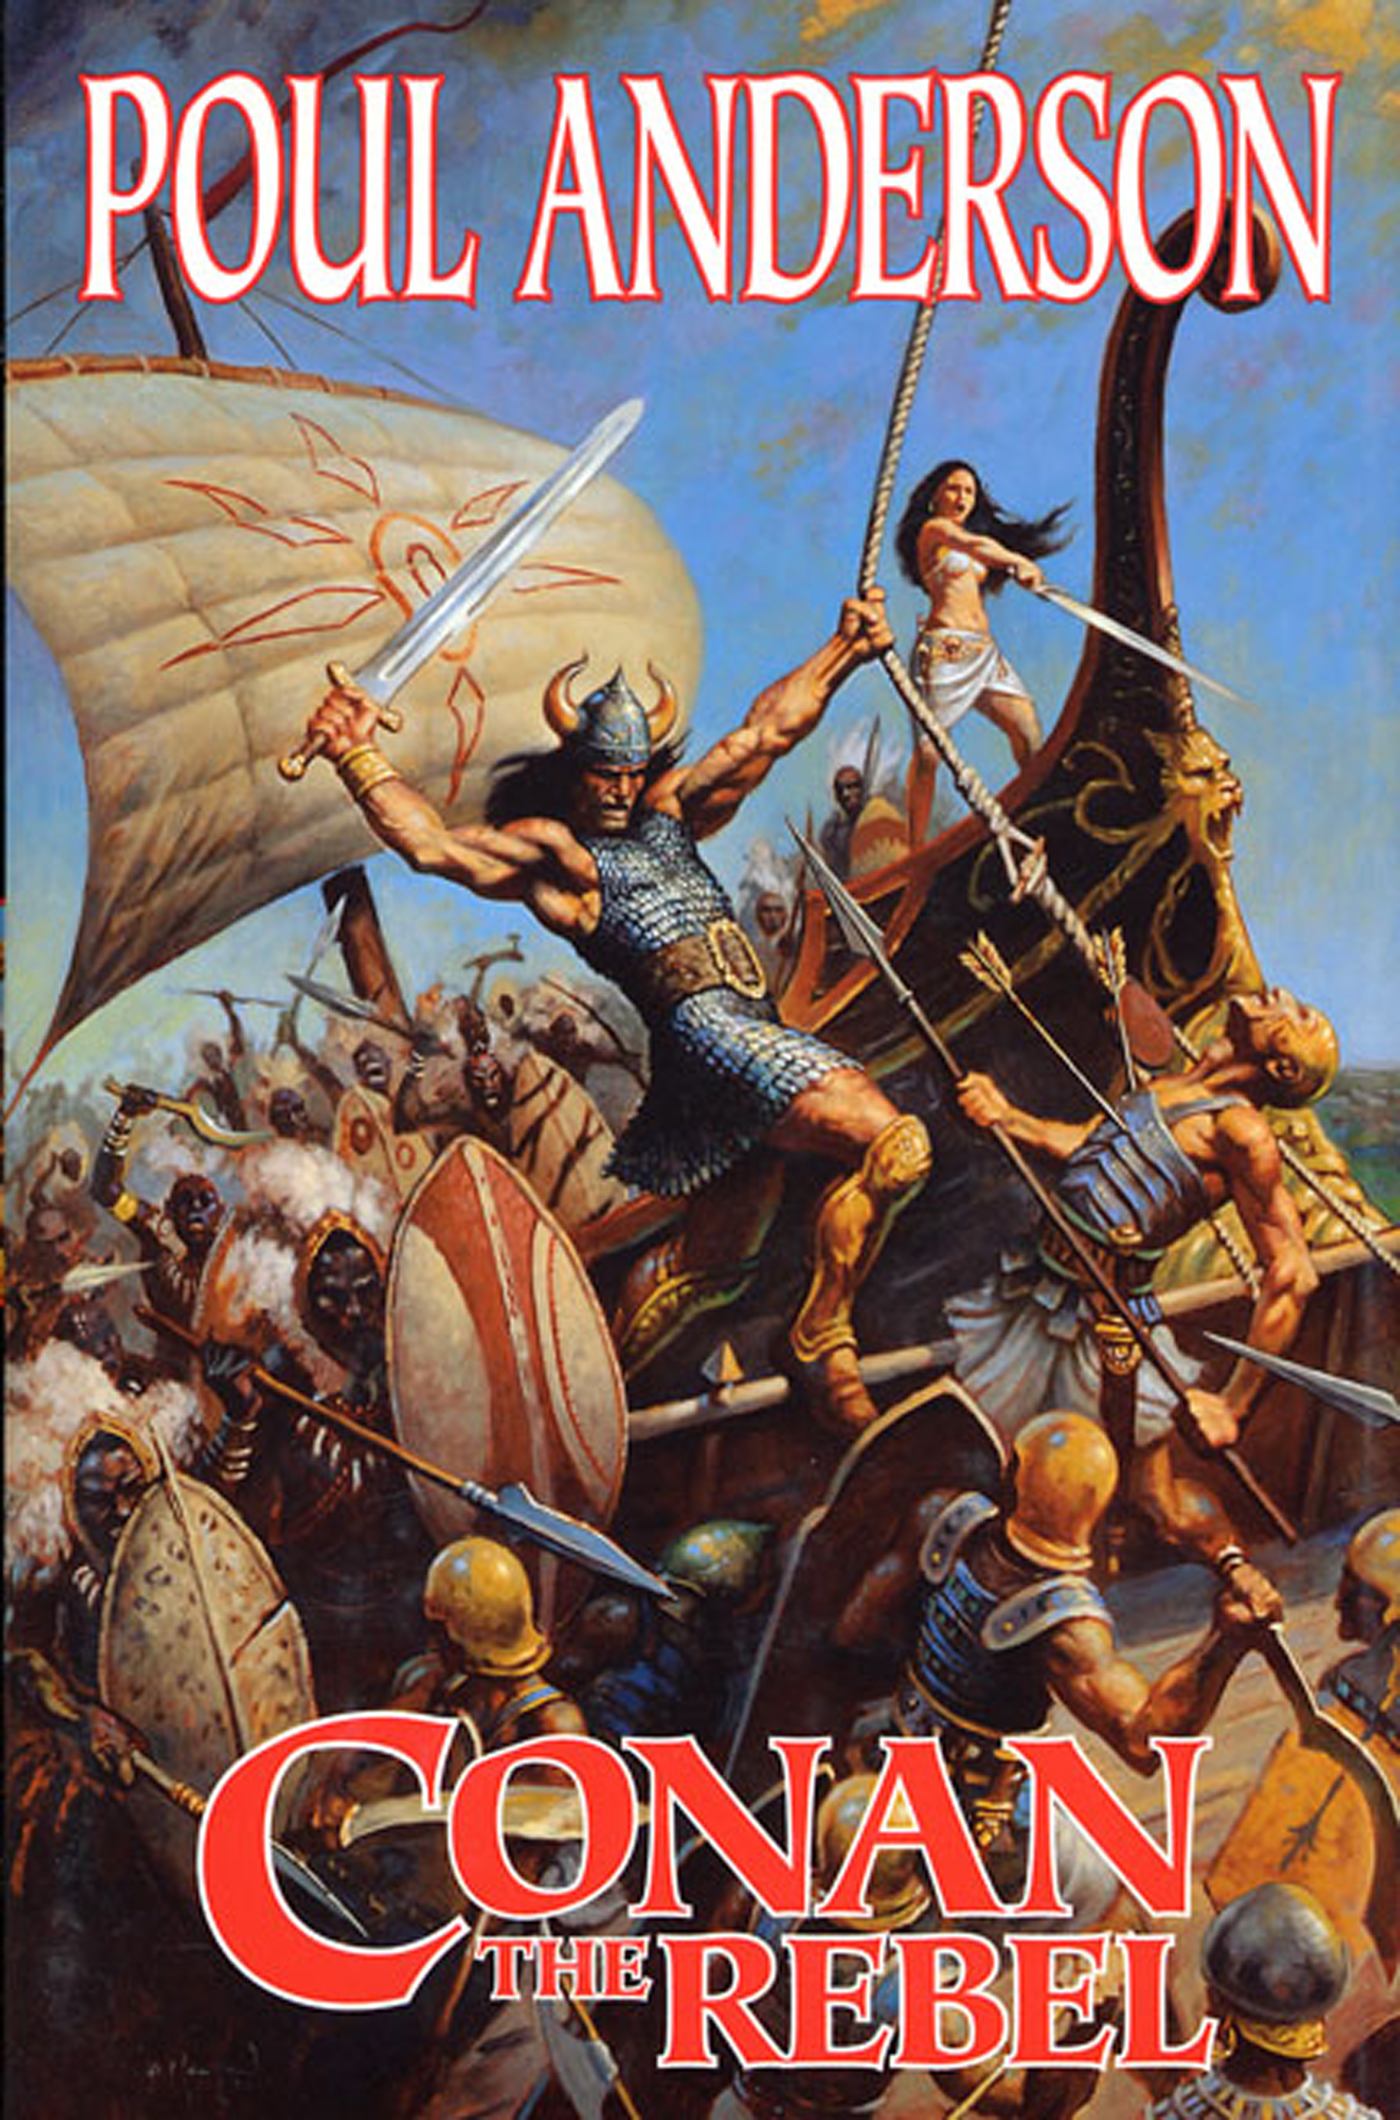 Conan The Rebel by Poul Anderson